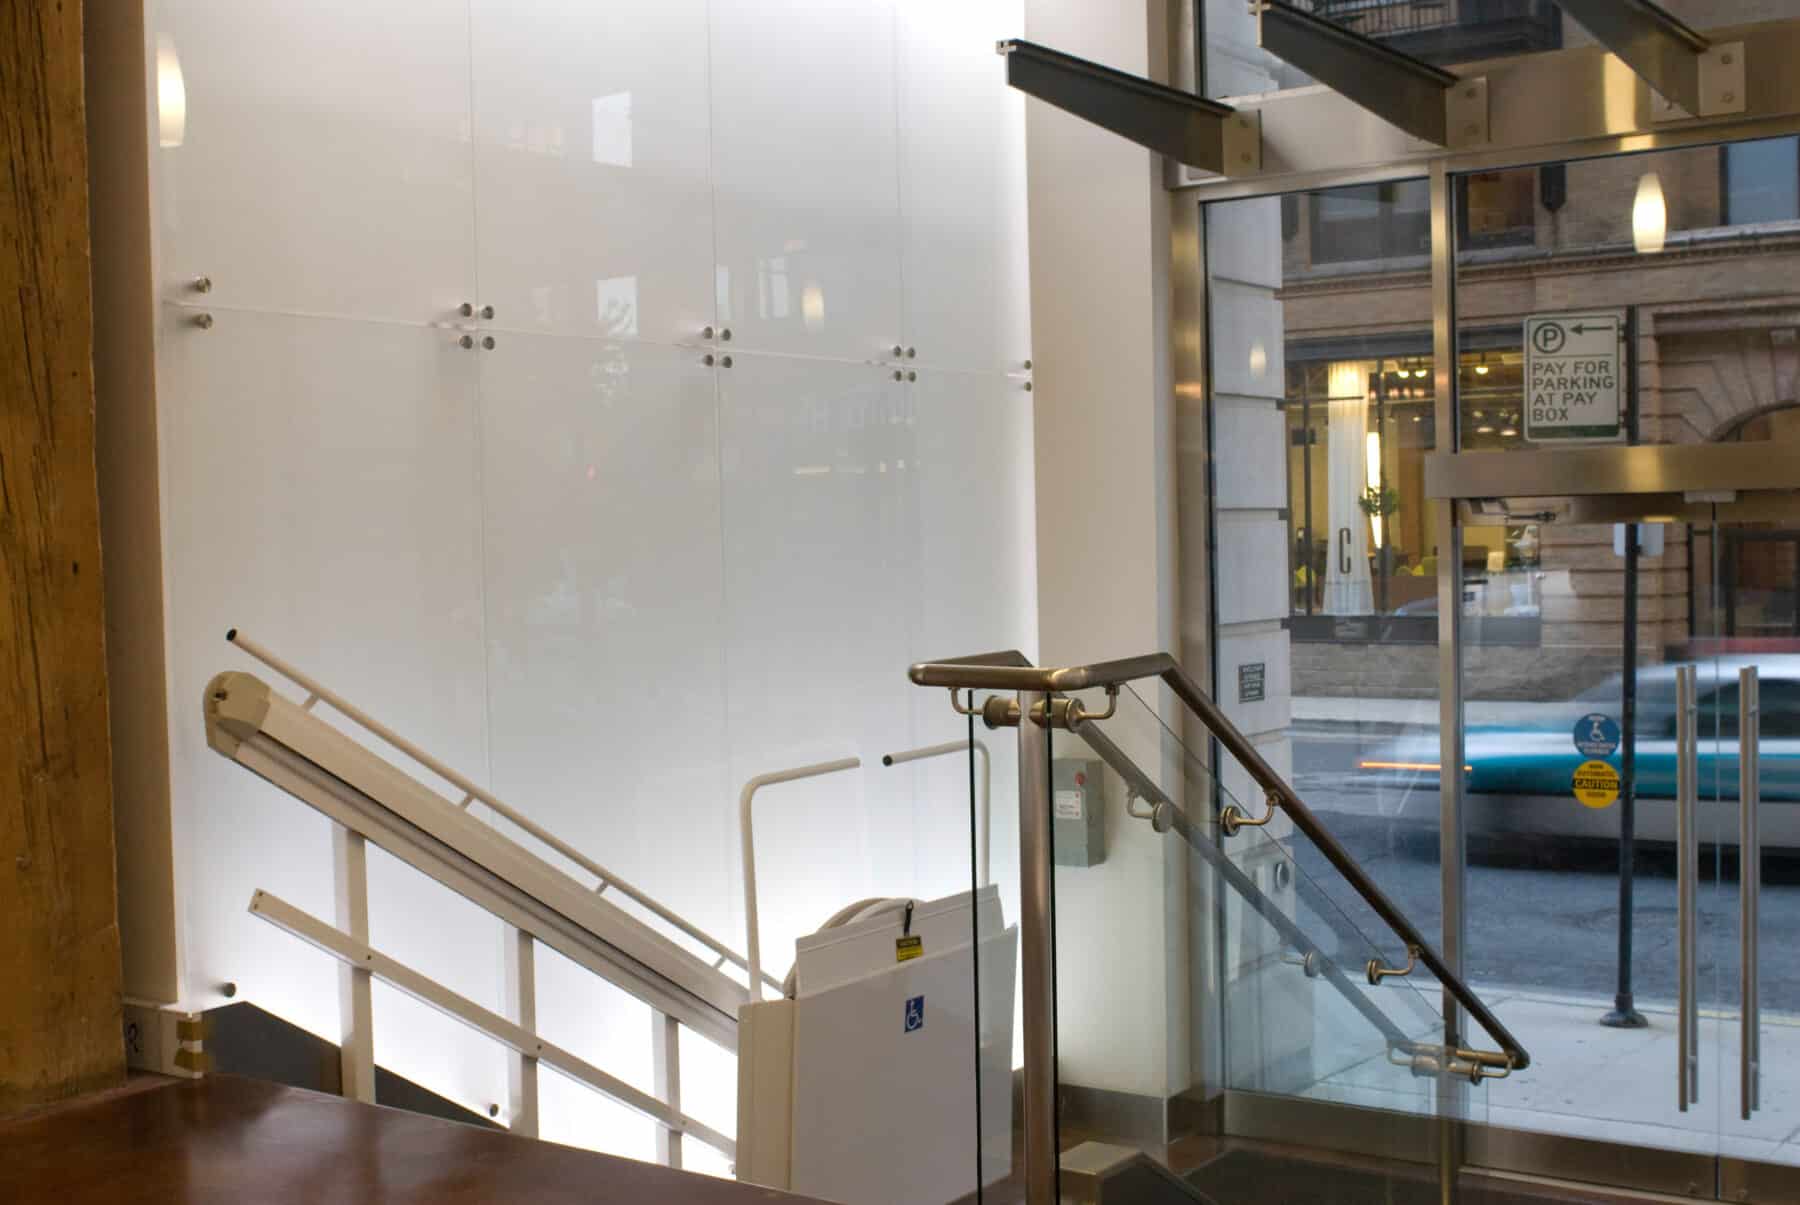 Custom Fabrication of Stainless Steel Metal and Glass Railing from Construction Specialty Projects by Commercial Builder & General Contractor Structural Enterprises